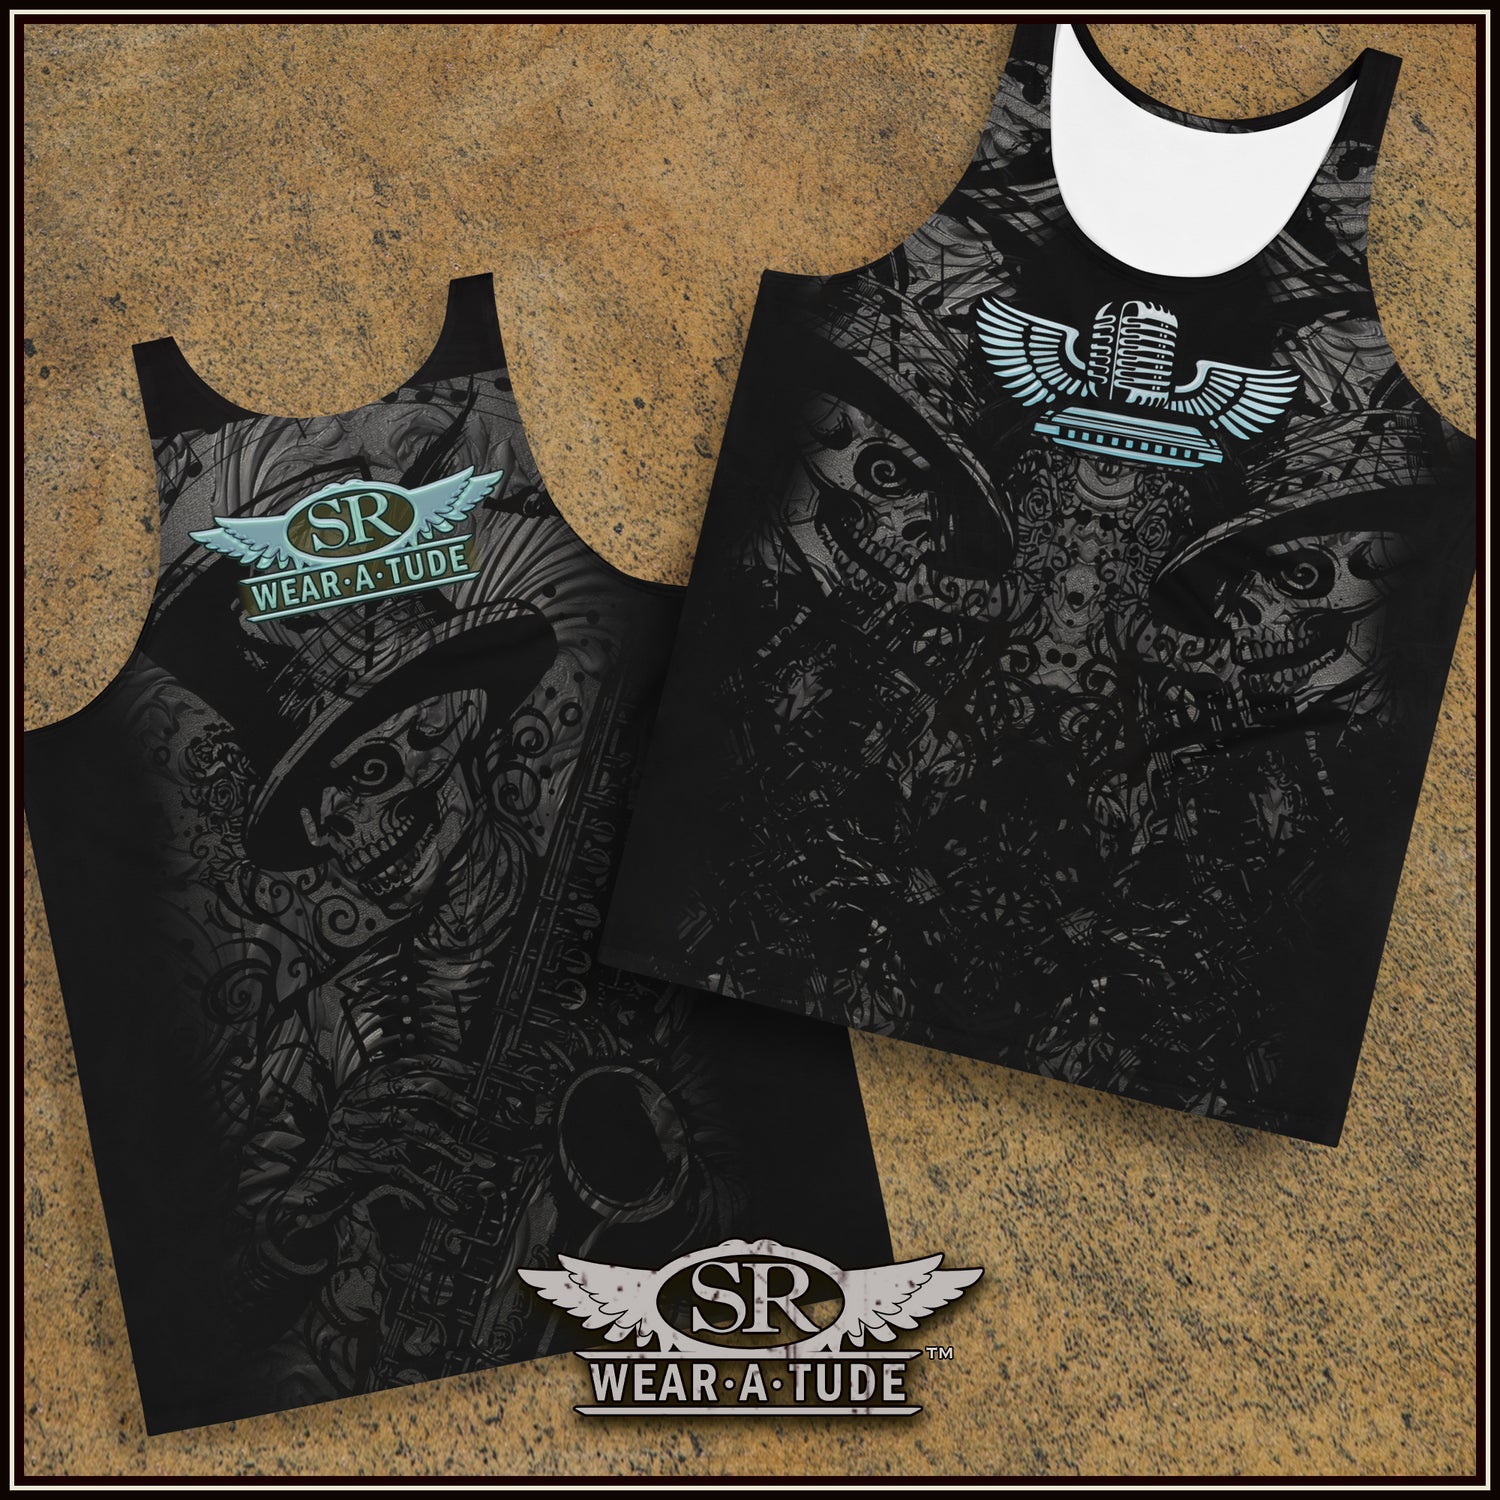 Smokin tank-tee design of Saxophone skeleton. Killer hot muscle shirt of SR Wear Atude flying mic & harmonic. Edgy workout tank. Sick graphic designs by SibBling Rivalry Design & The Joubert Sisters